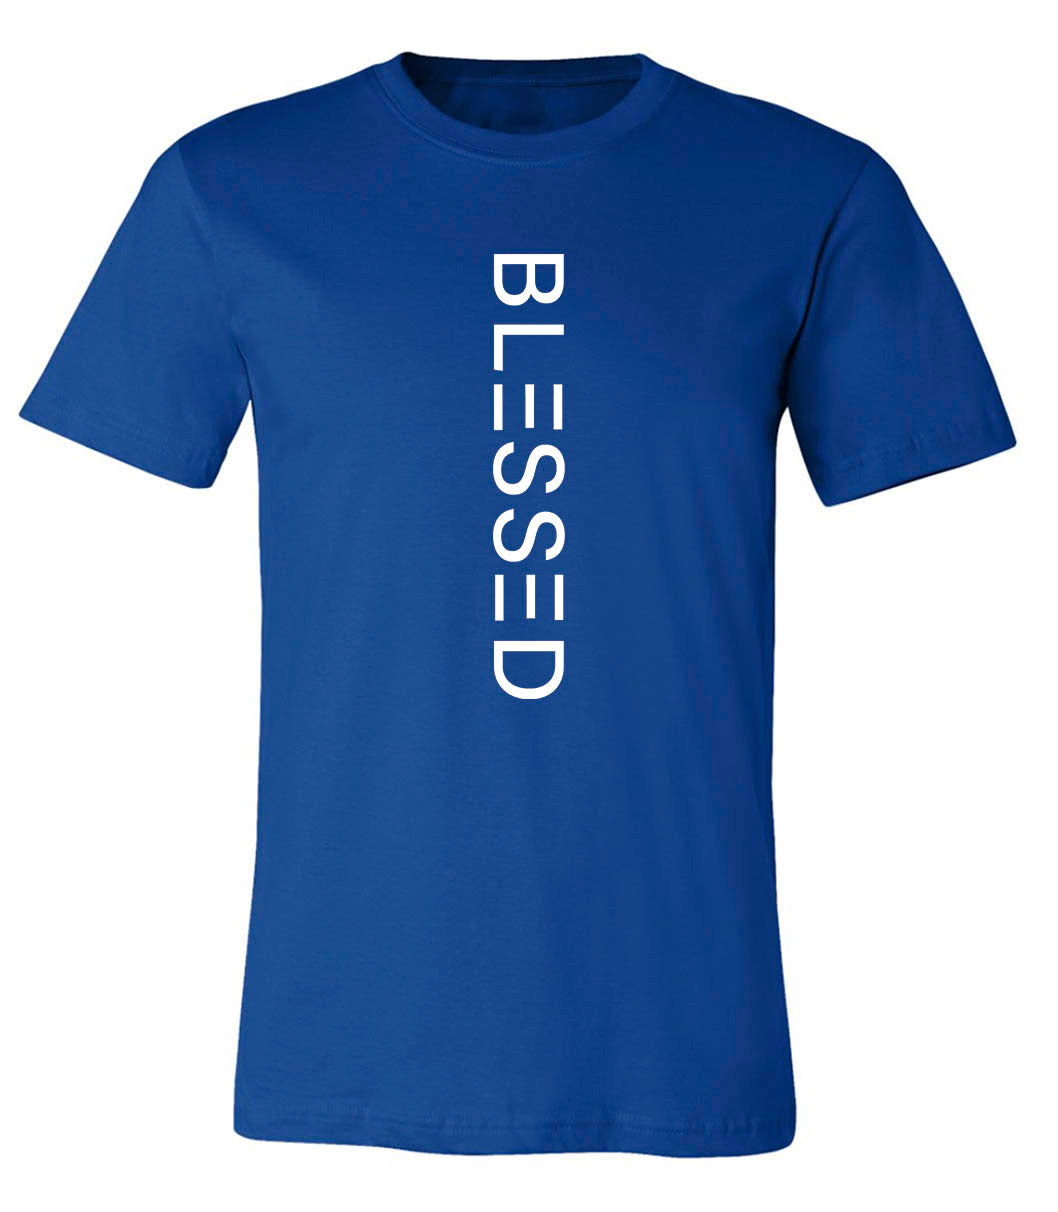 Royal Blue Blessed tshirt with vertical text. Short sleeve soft feel